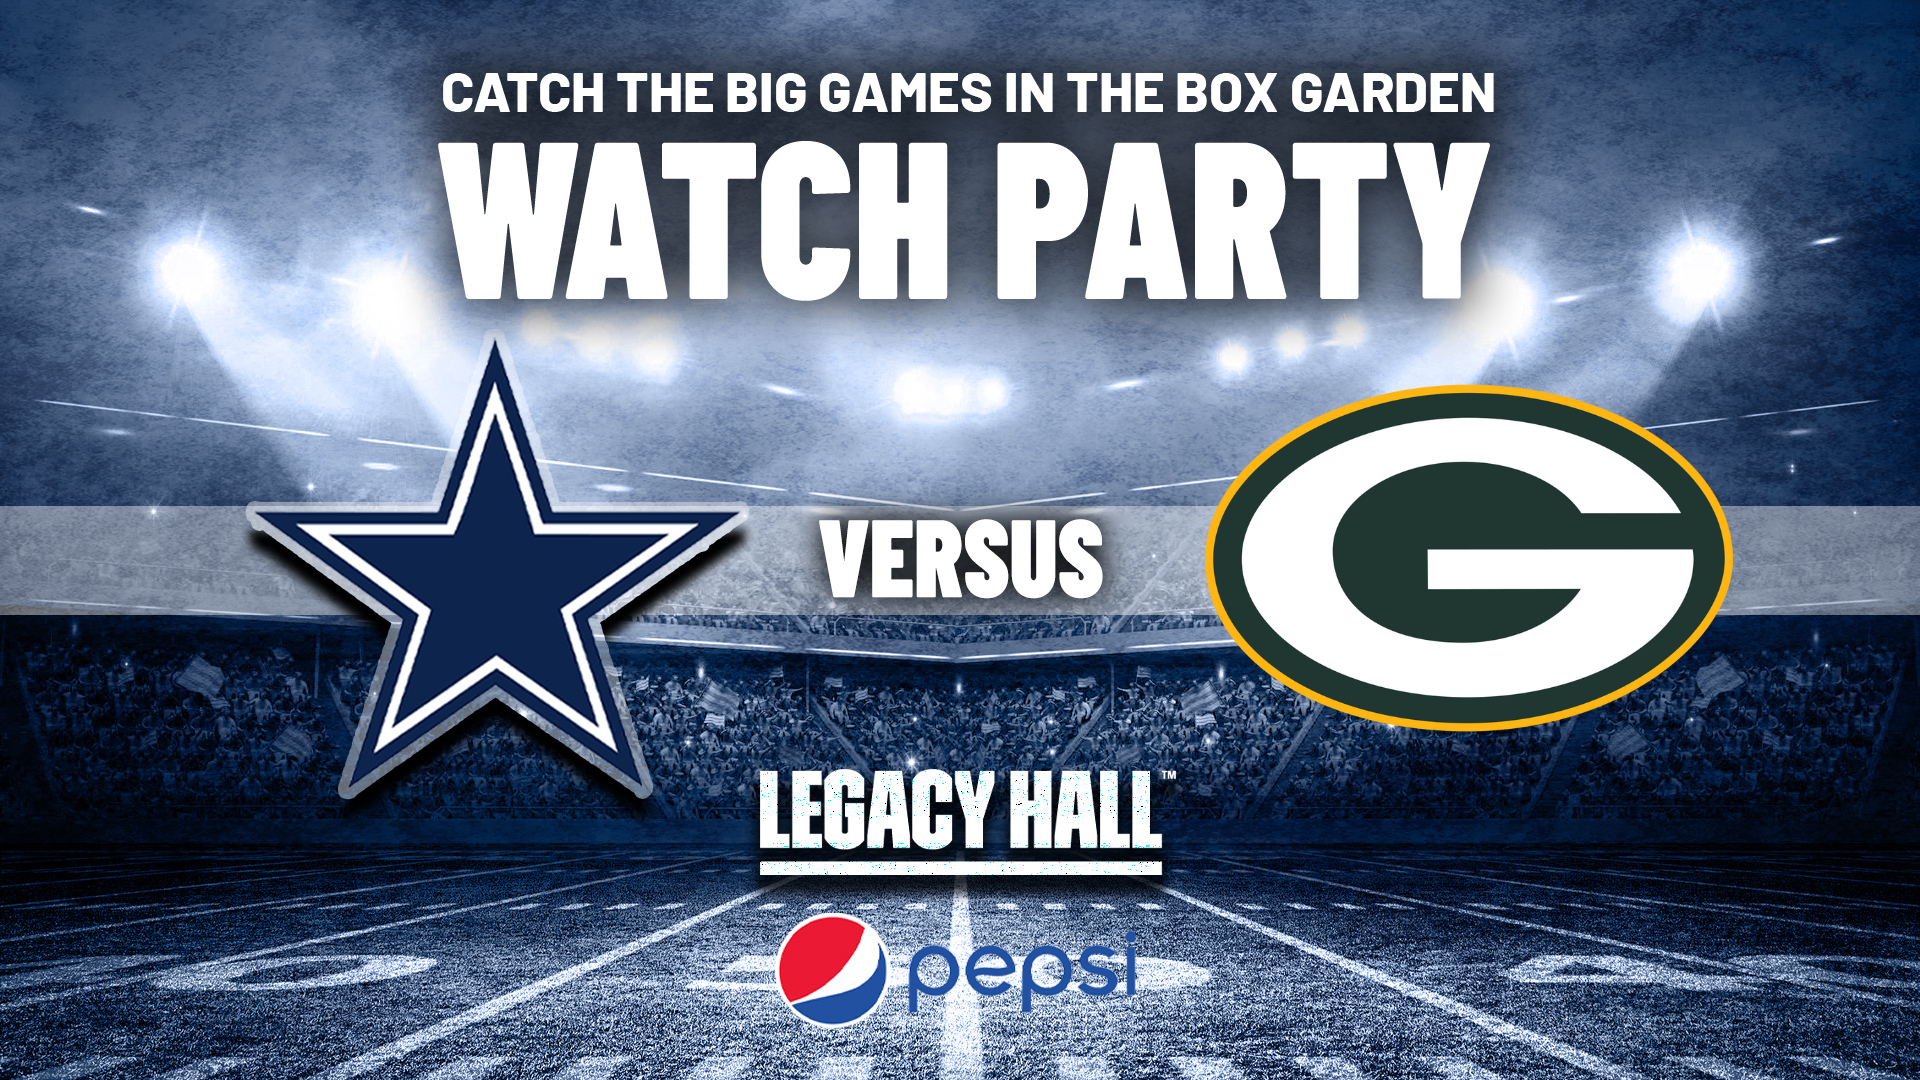 Cowboys vs. Packers Watch Party - hero